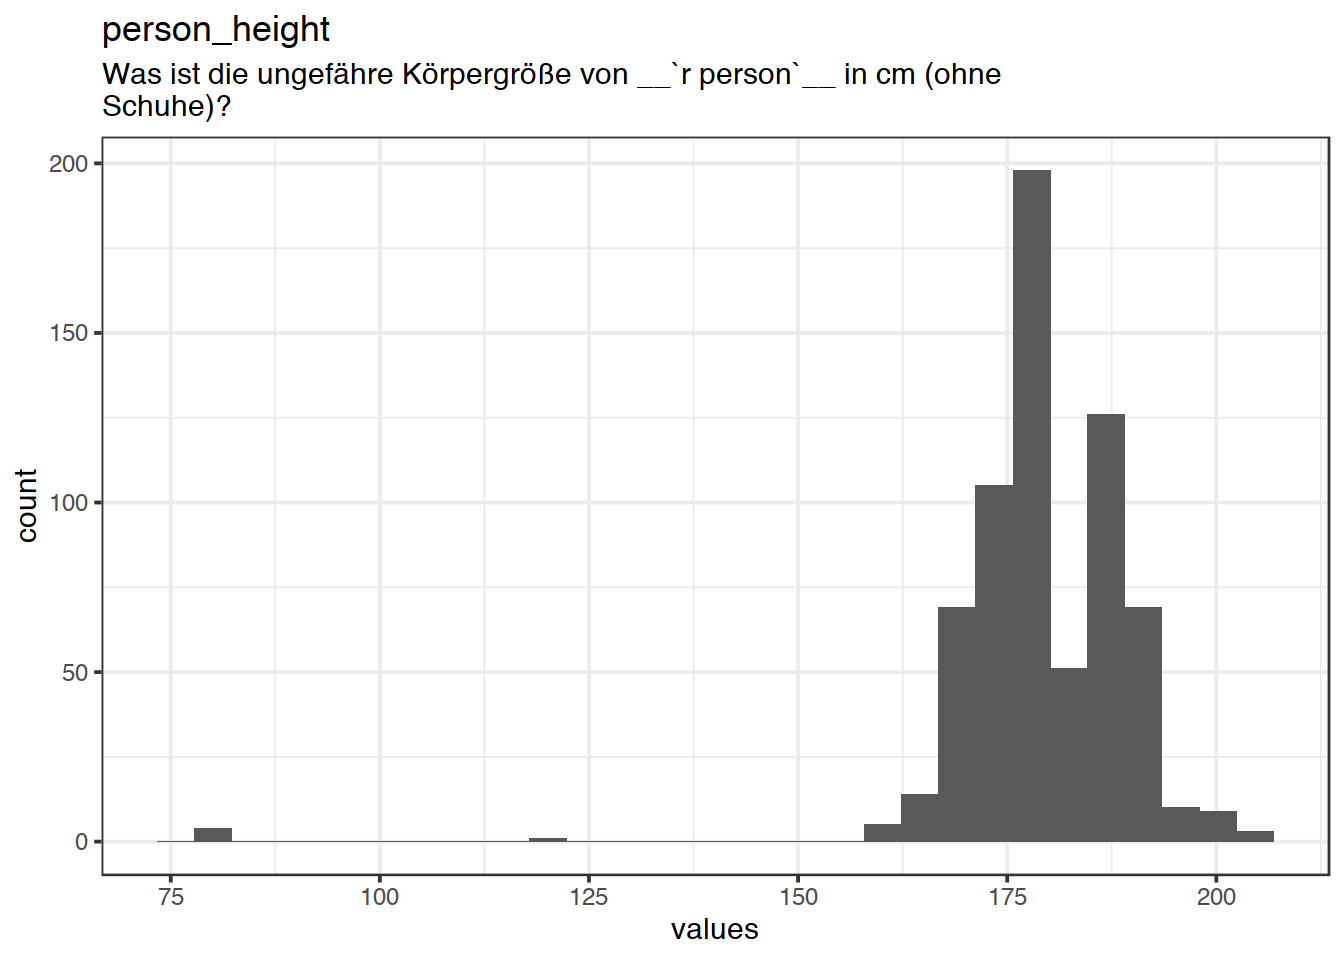 Distribution of values for person_height